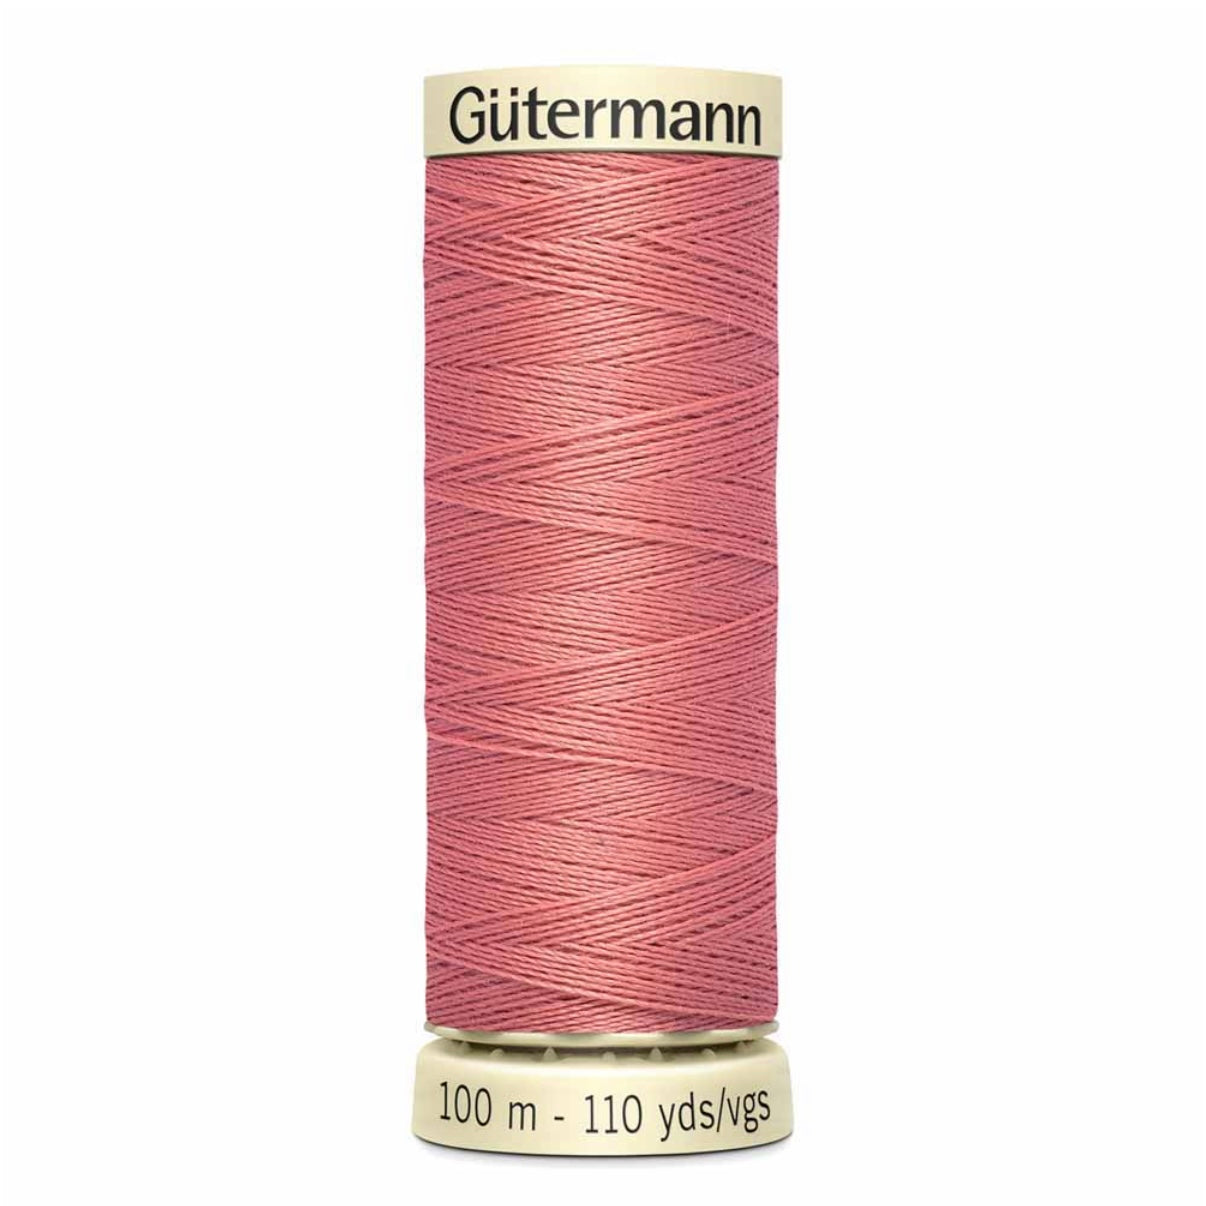 Sew-All Polyester Thread - Gütermann - Col. 352 / Coral Rose